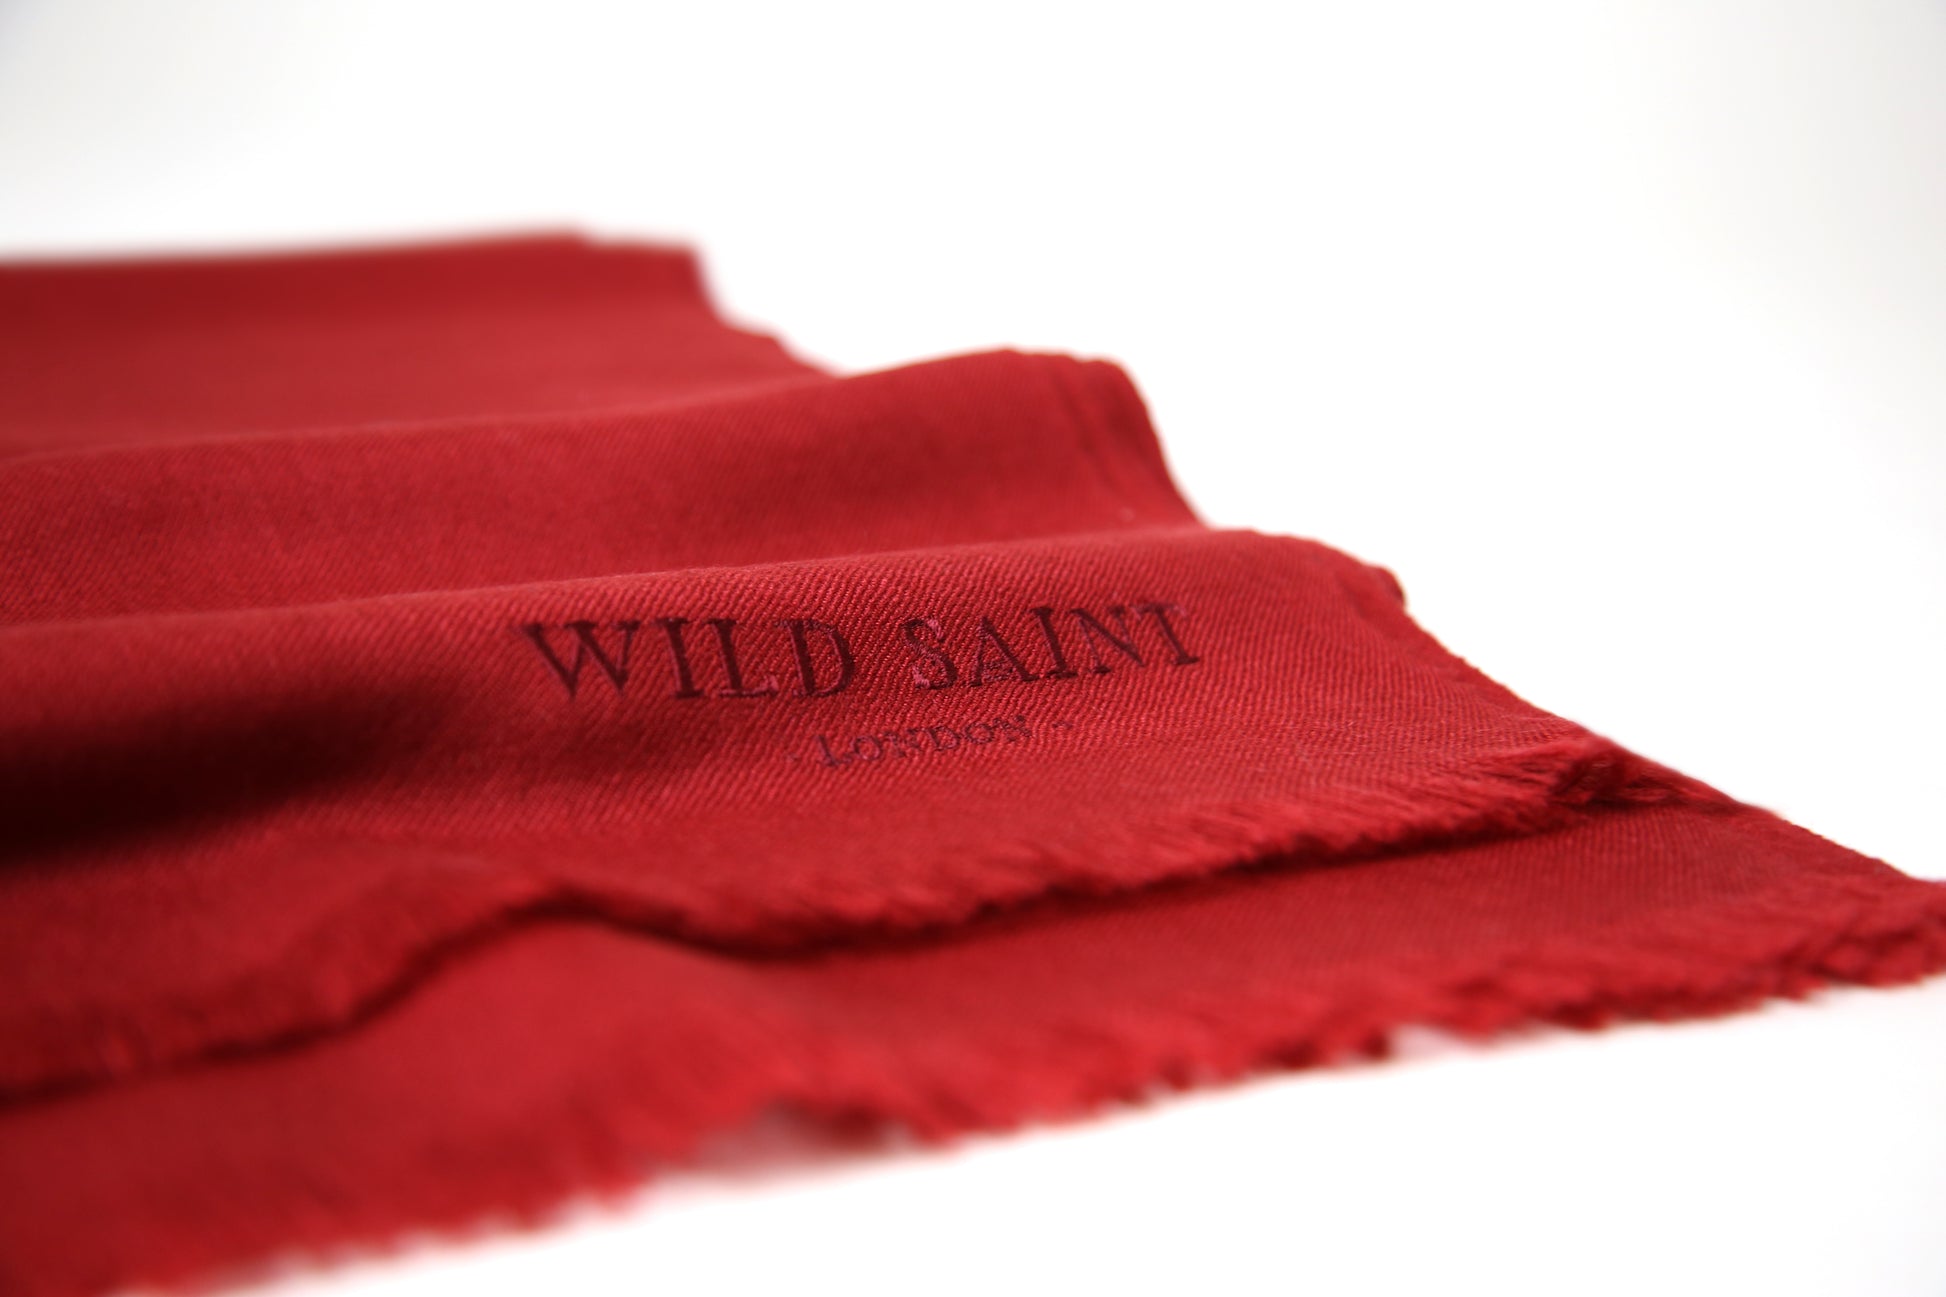 Berry red lightweight 100% cashmere scarf for women and men. Includes complimentary personlisation. Luxury cashmere scarves made in Italy